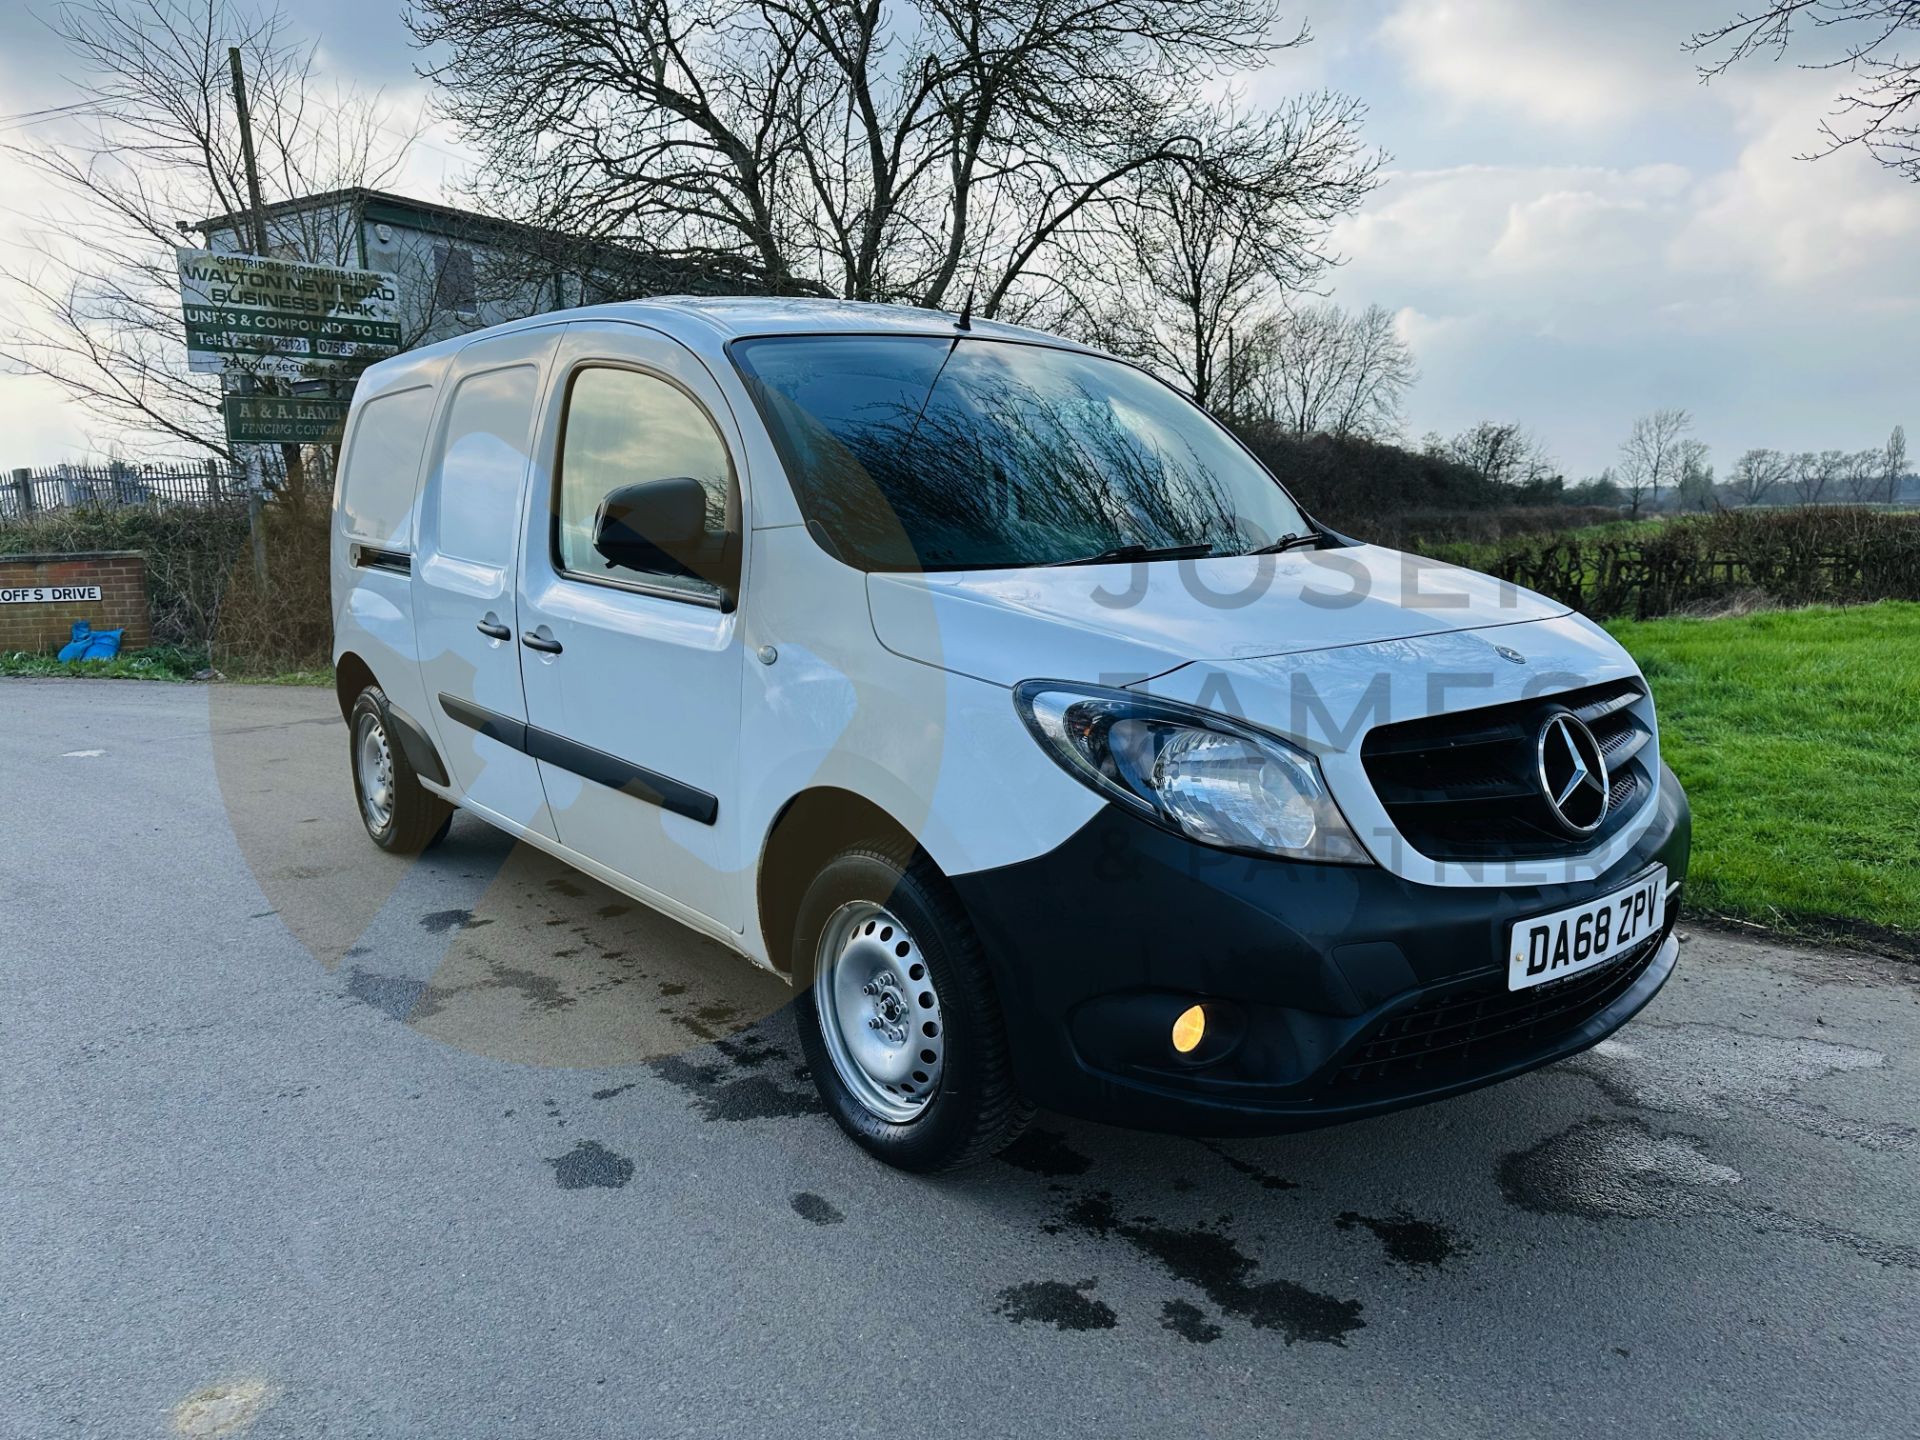 (On Sale) MERCEDES CITAN 111CDI "LWB" 2019 MODEL - AIR CON - EURO 6 - ELECTRIC PACK - NO VAT!!! - Image 2 of 28